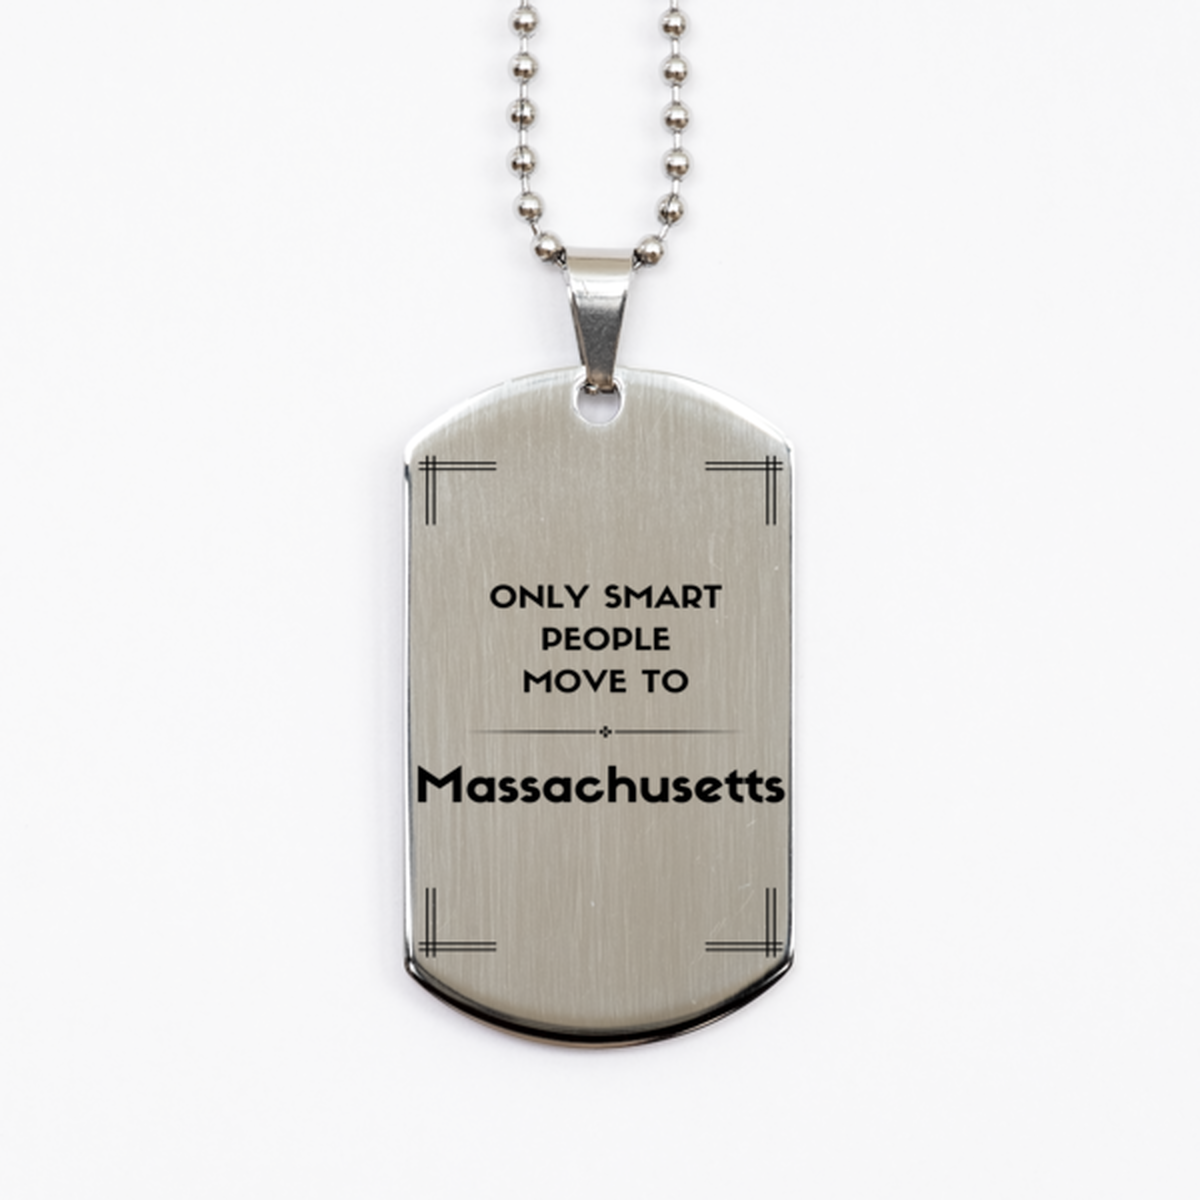 Only smart people move to Massachusetts Silver Dog Tag, Gag Gifts For Massachusetts, Move to Massachusetts Gifts for Friends Coworker Funny Saying Quote